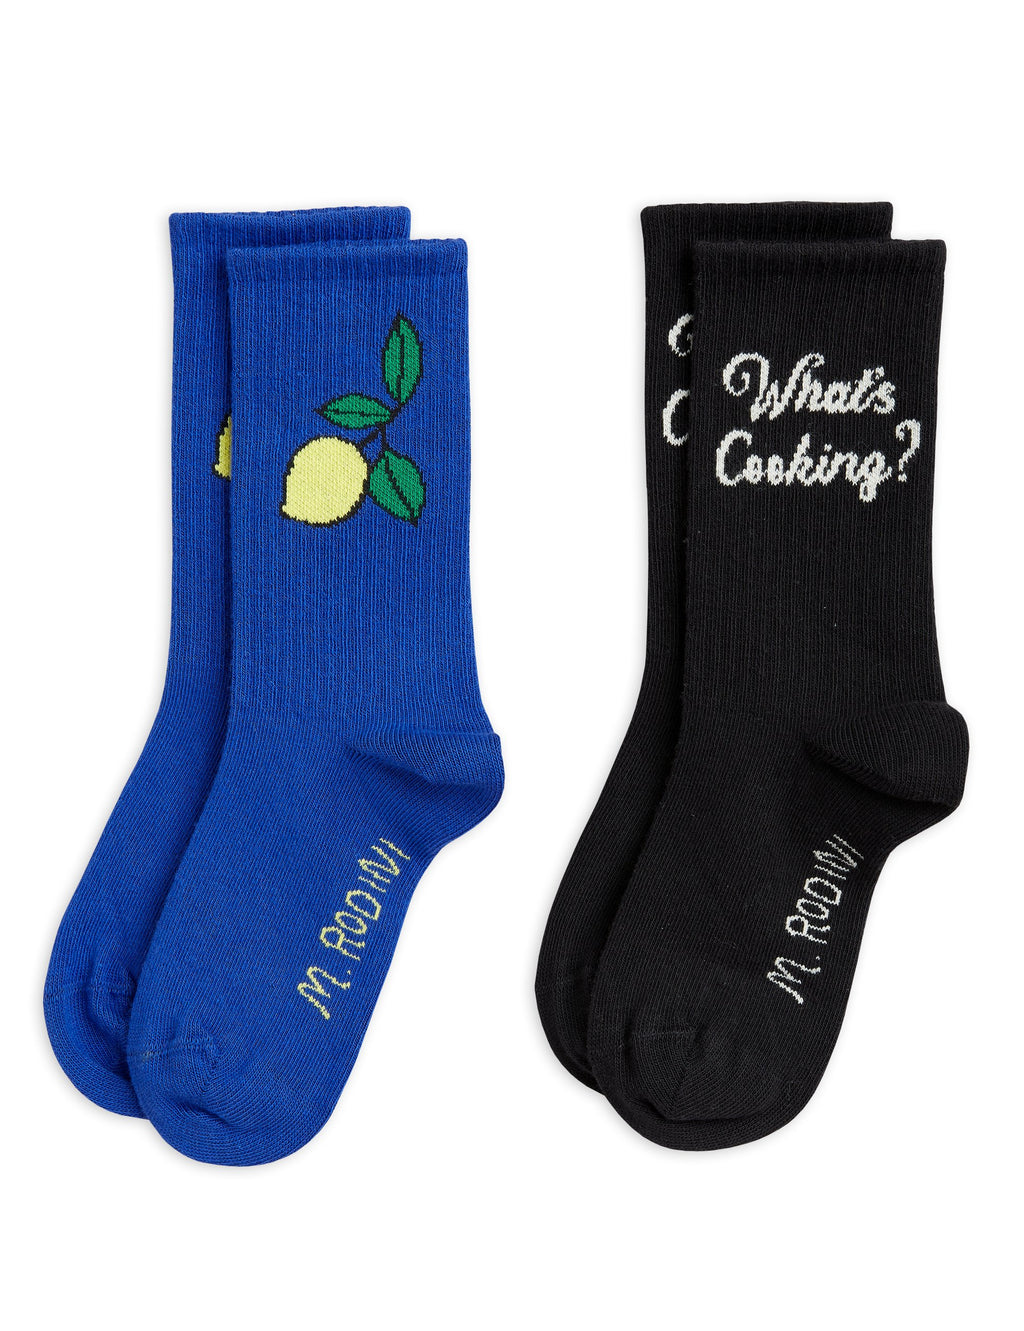 What's Cooking Socks / 2 Pack